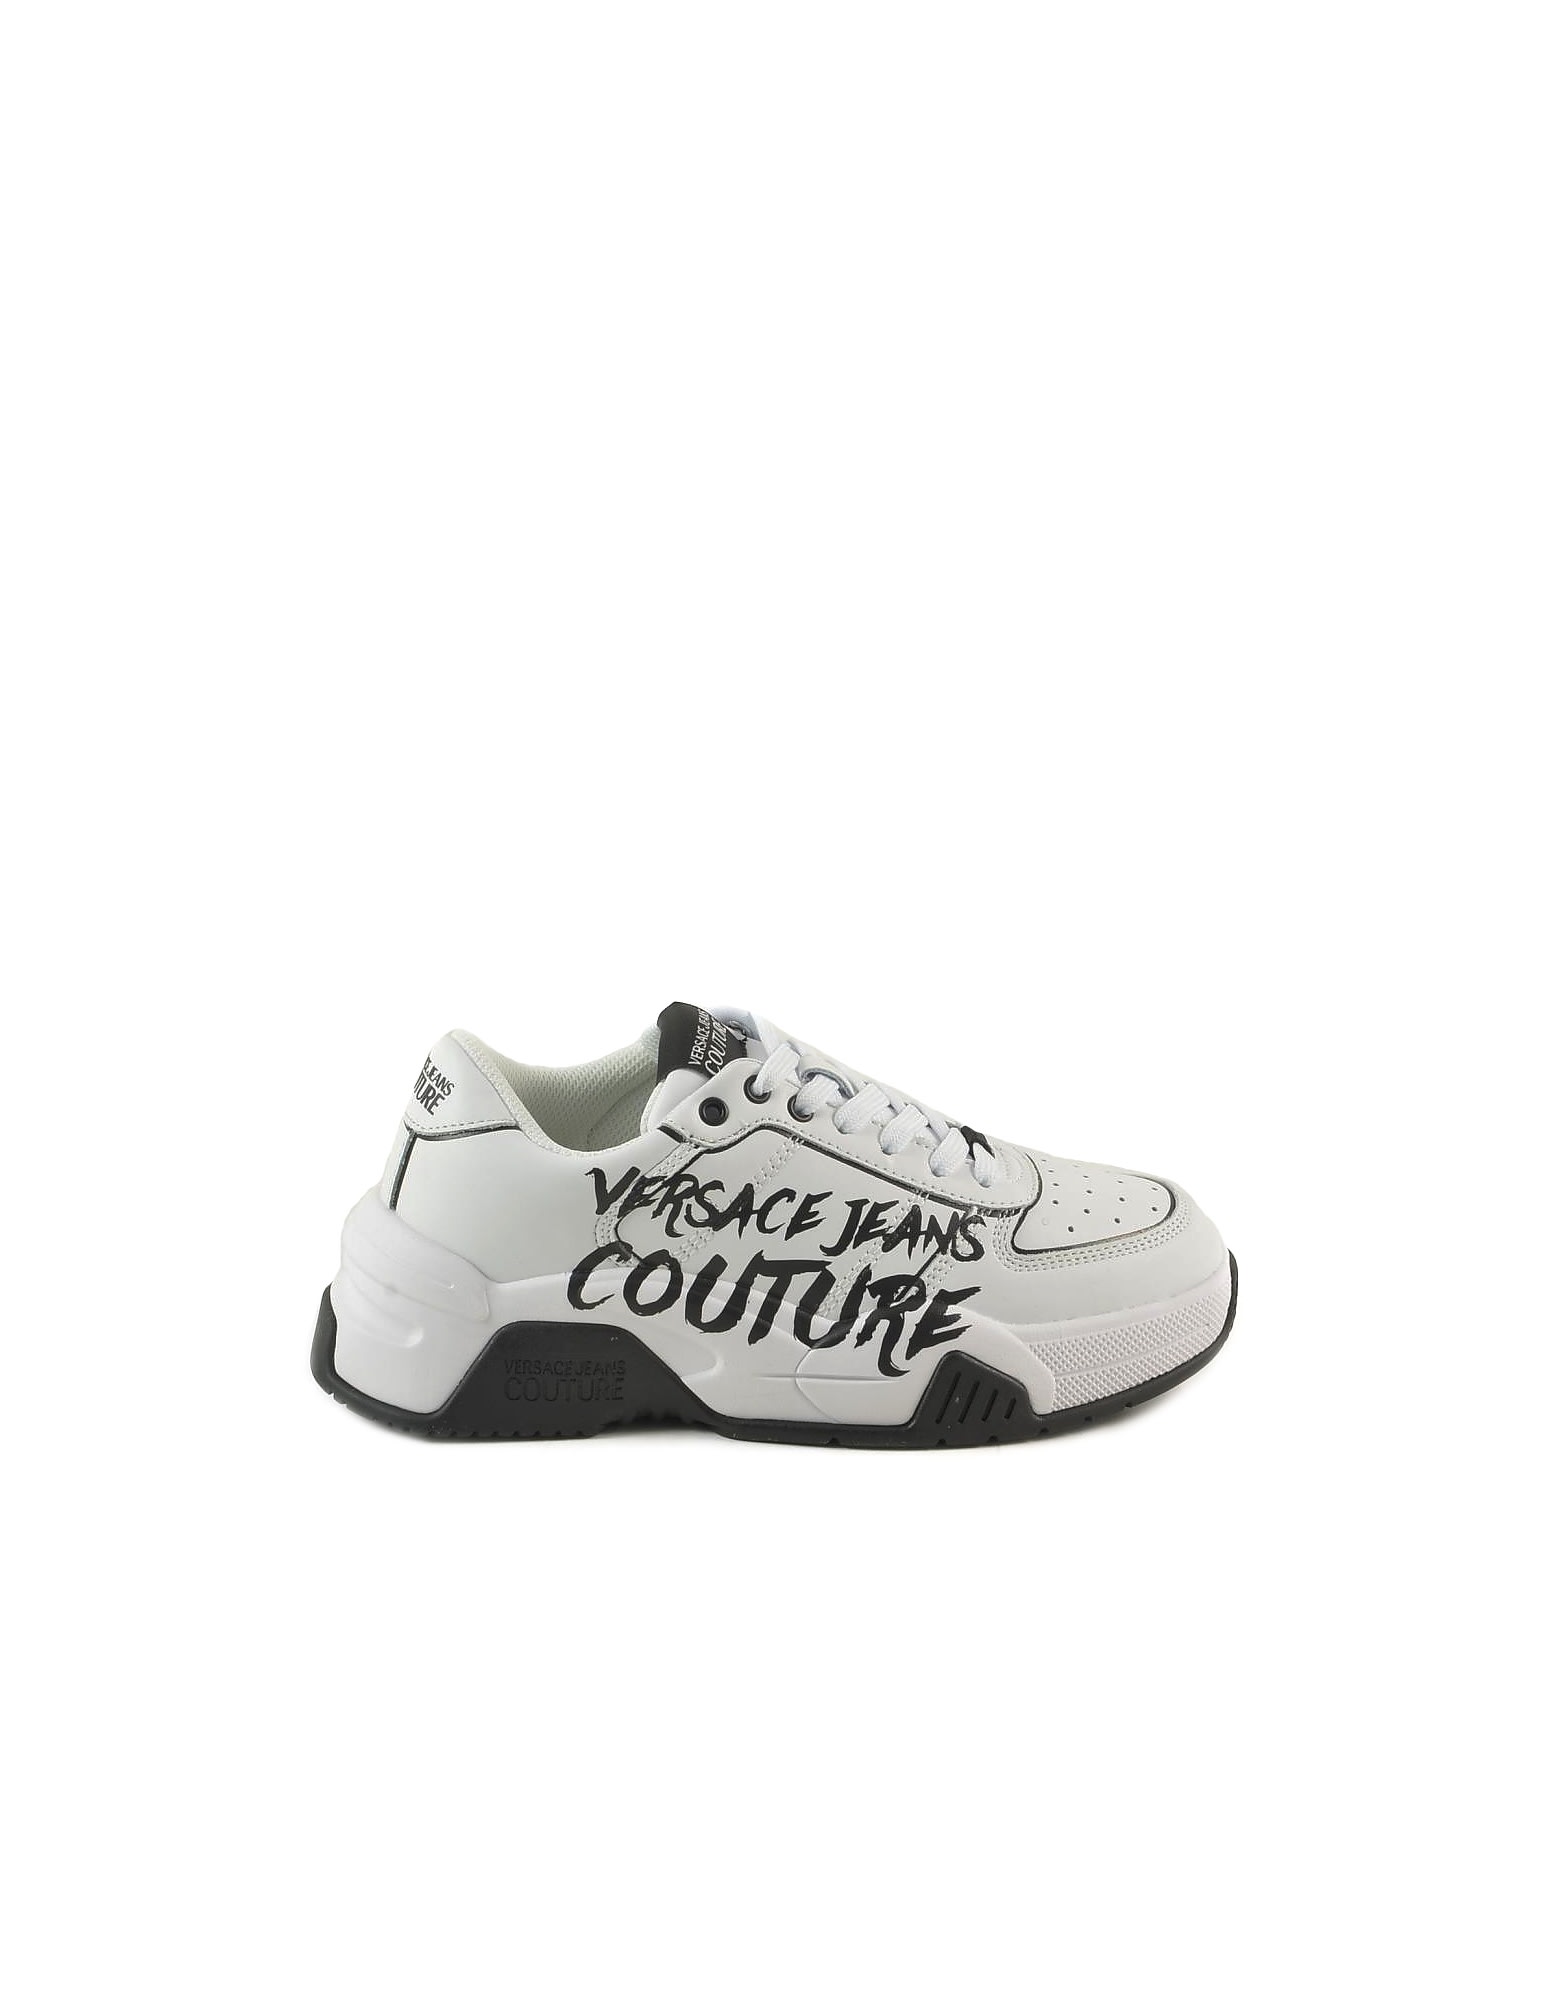 Versace Jeans Couture White Womens Sneakers